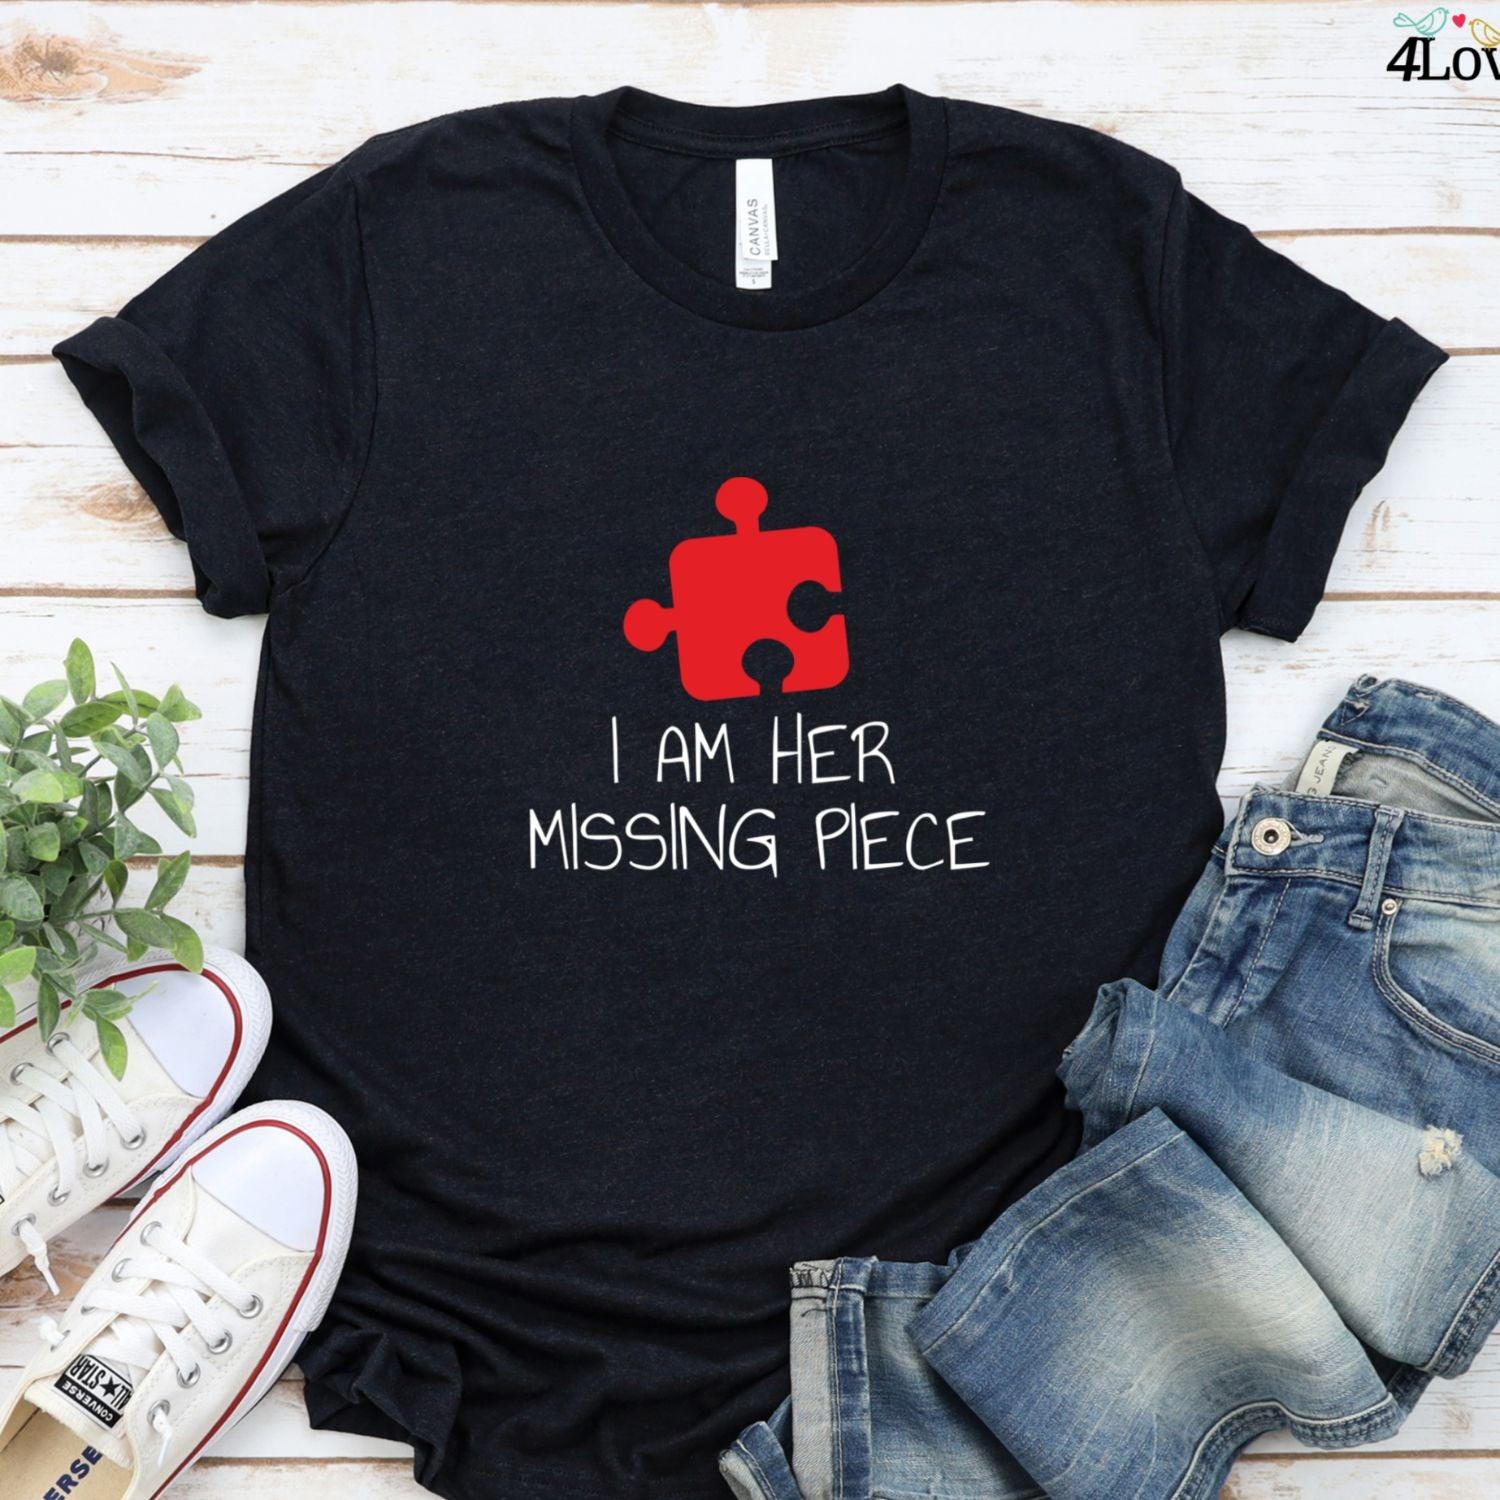 Couple's Matching Set: "I'm Her/His Missing Piece" - Witty & Adorable Outfits, Perfect Gift - 4Lovebirds